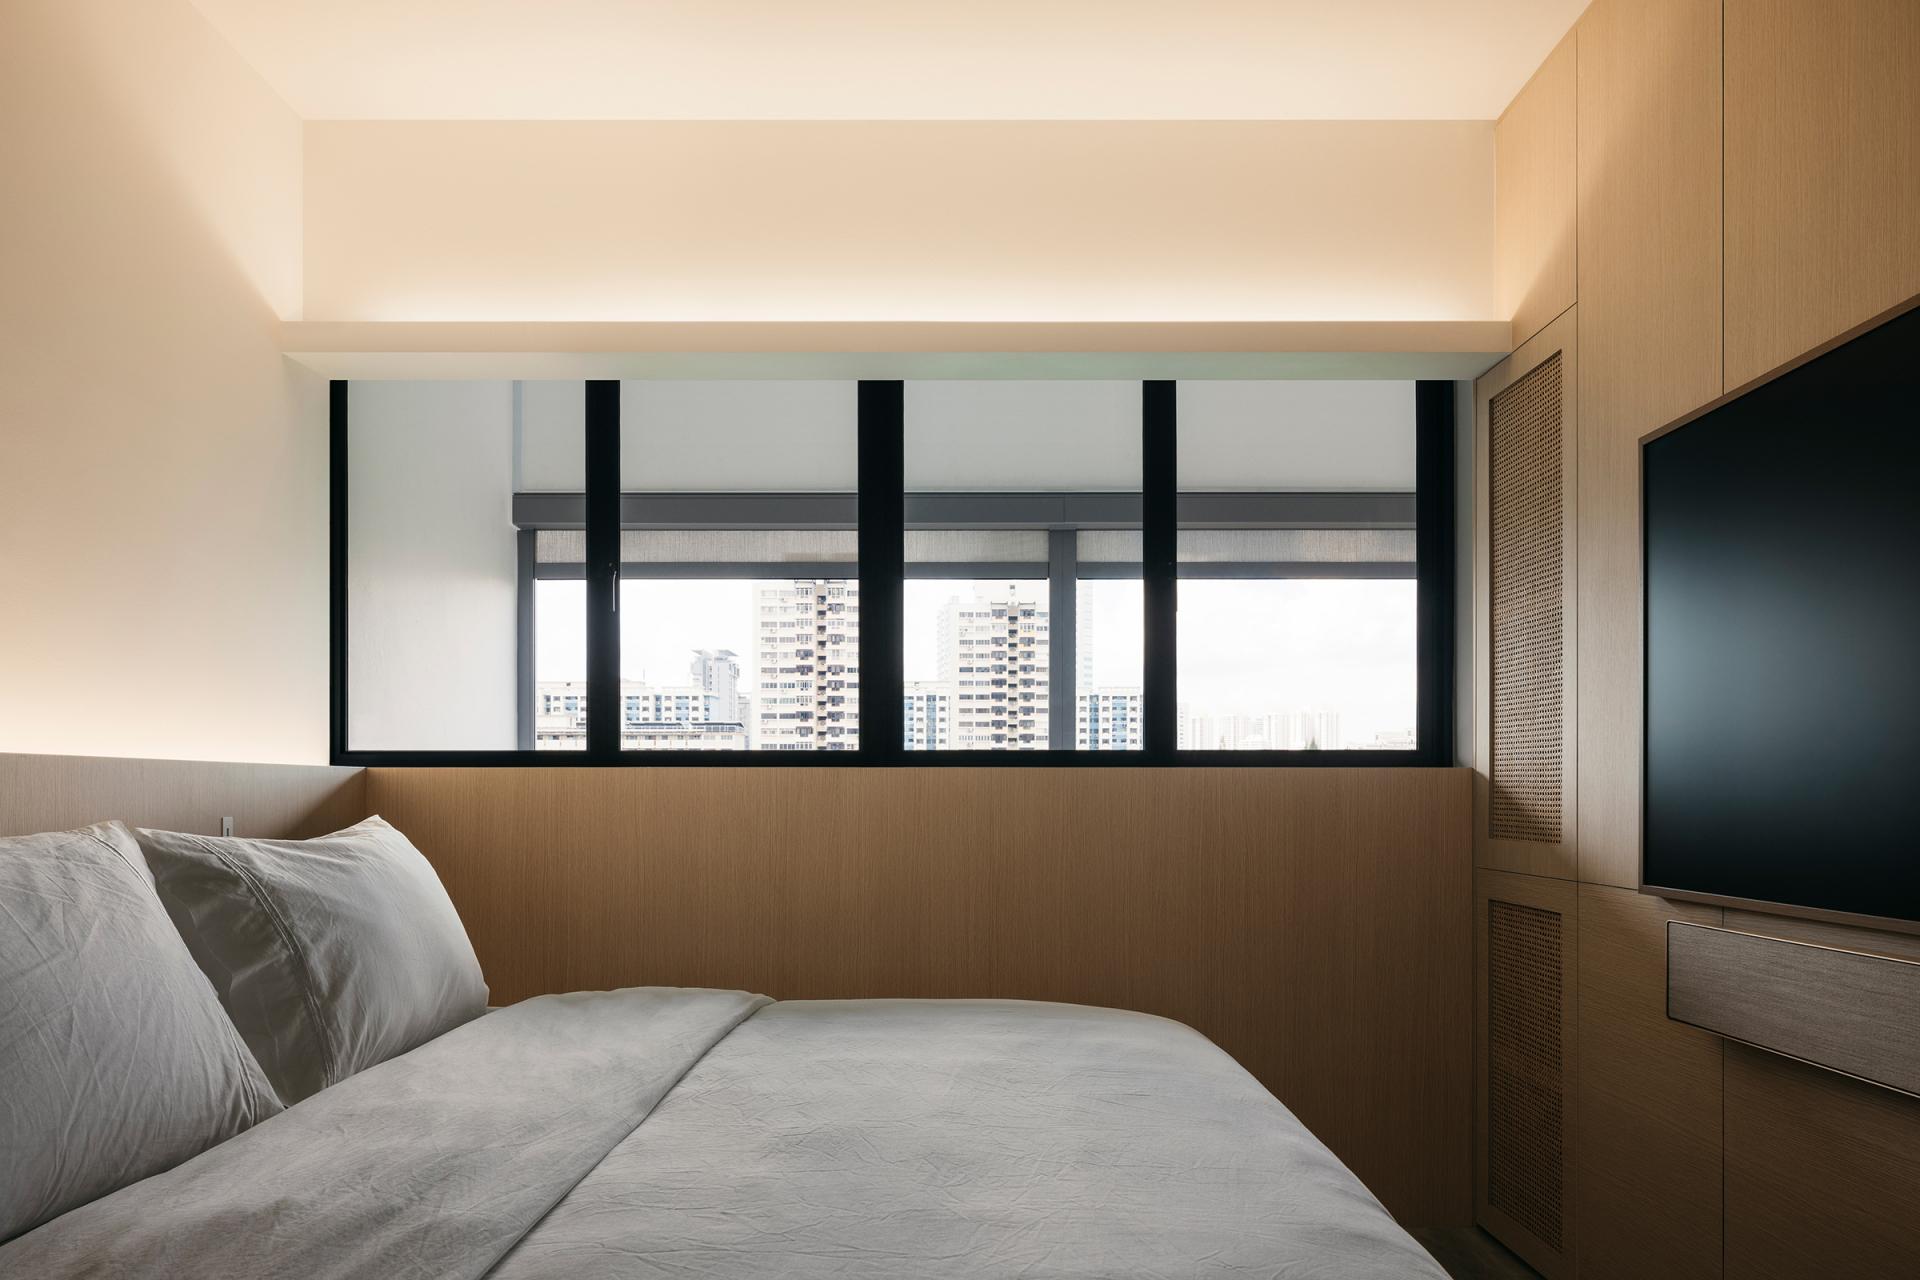 This two-storey Singapore apartment was designed to feel like a Japanese ryokan